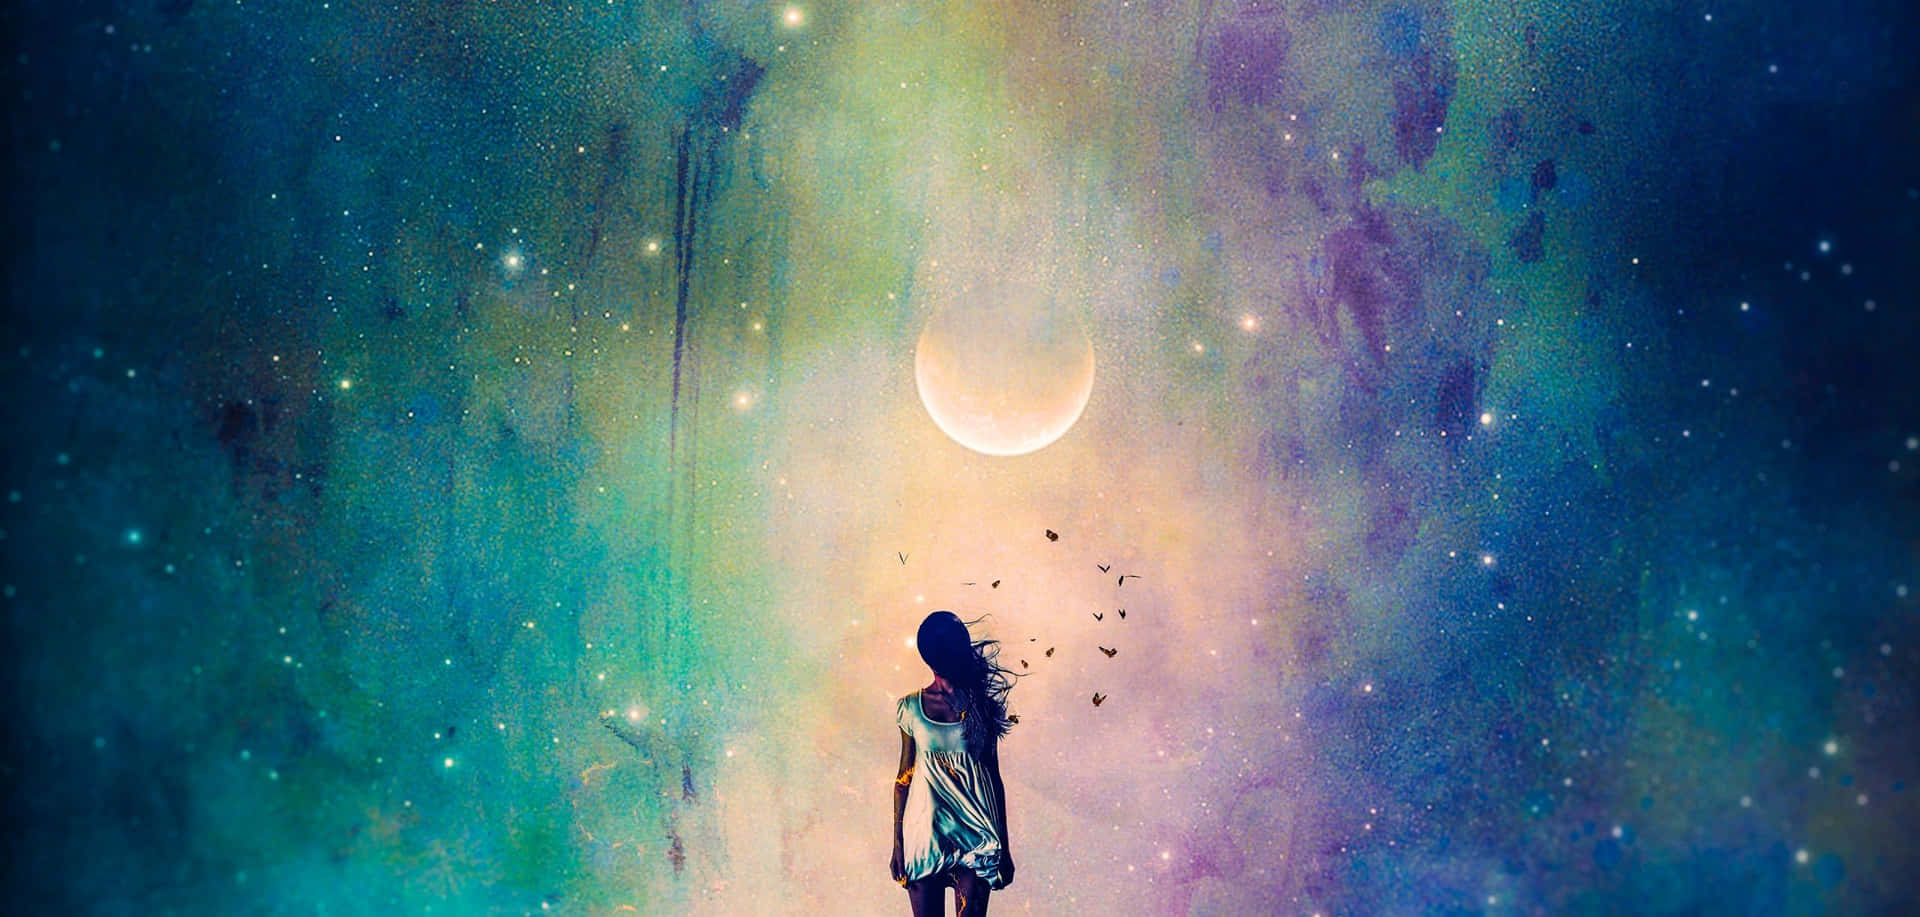 A Girl Is Standing In Front Of A Colorful Sky With A Moon And Stars